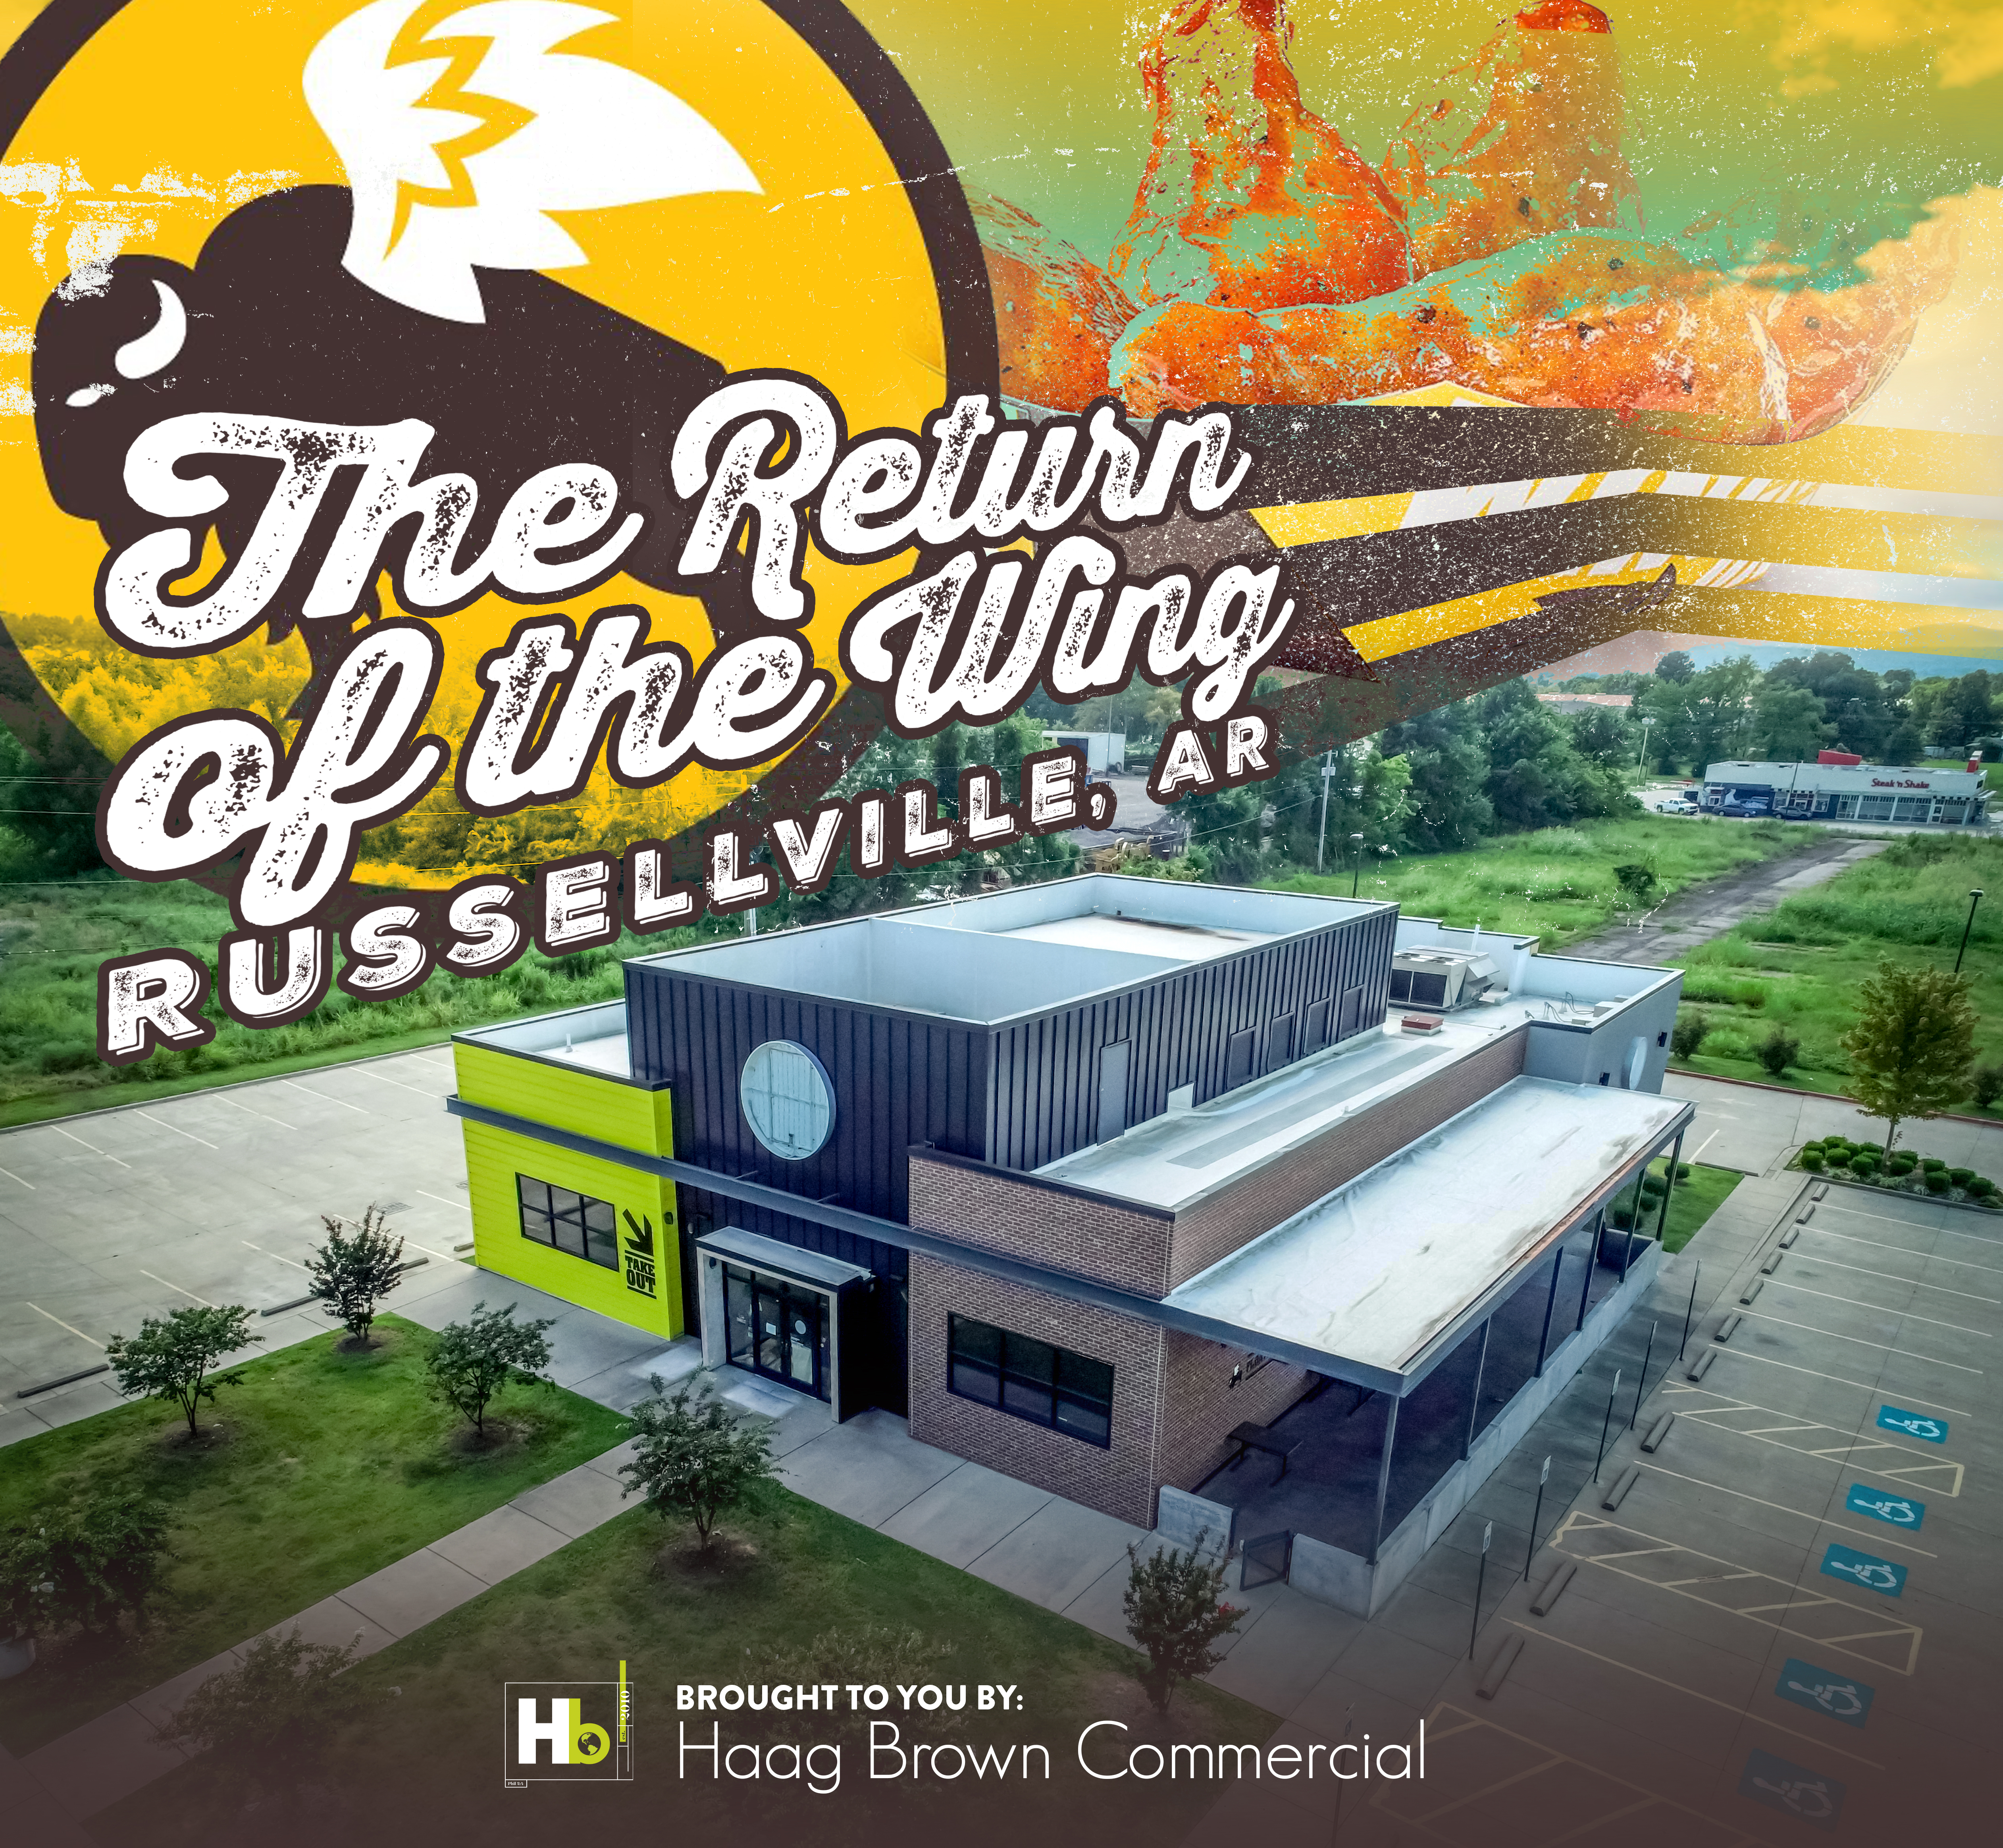 Buffalo Wild Wings Set to Return to Russellville with a Fresh Look!